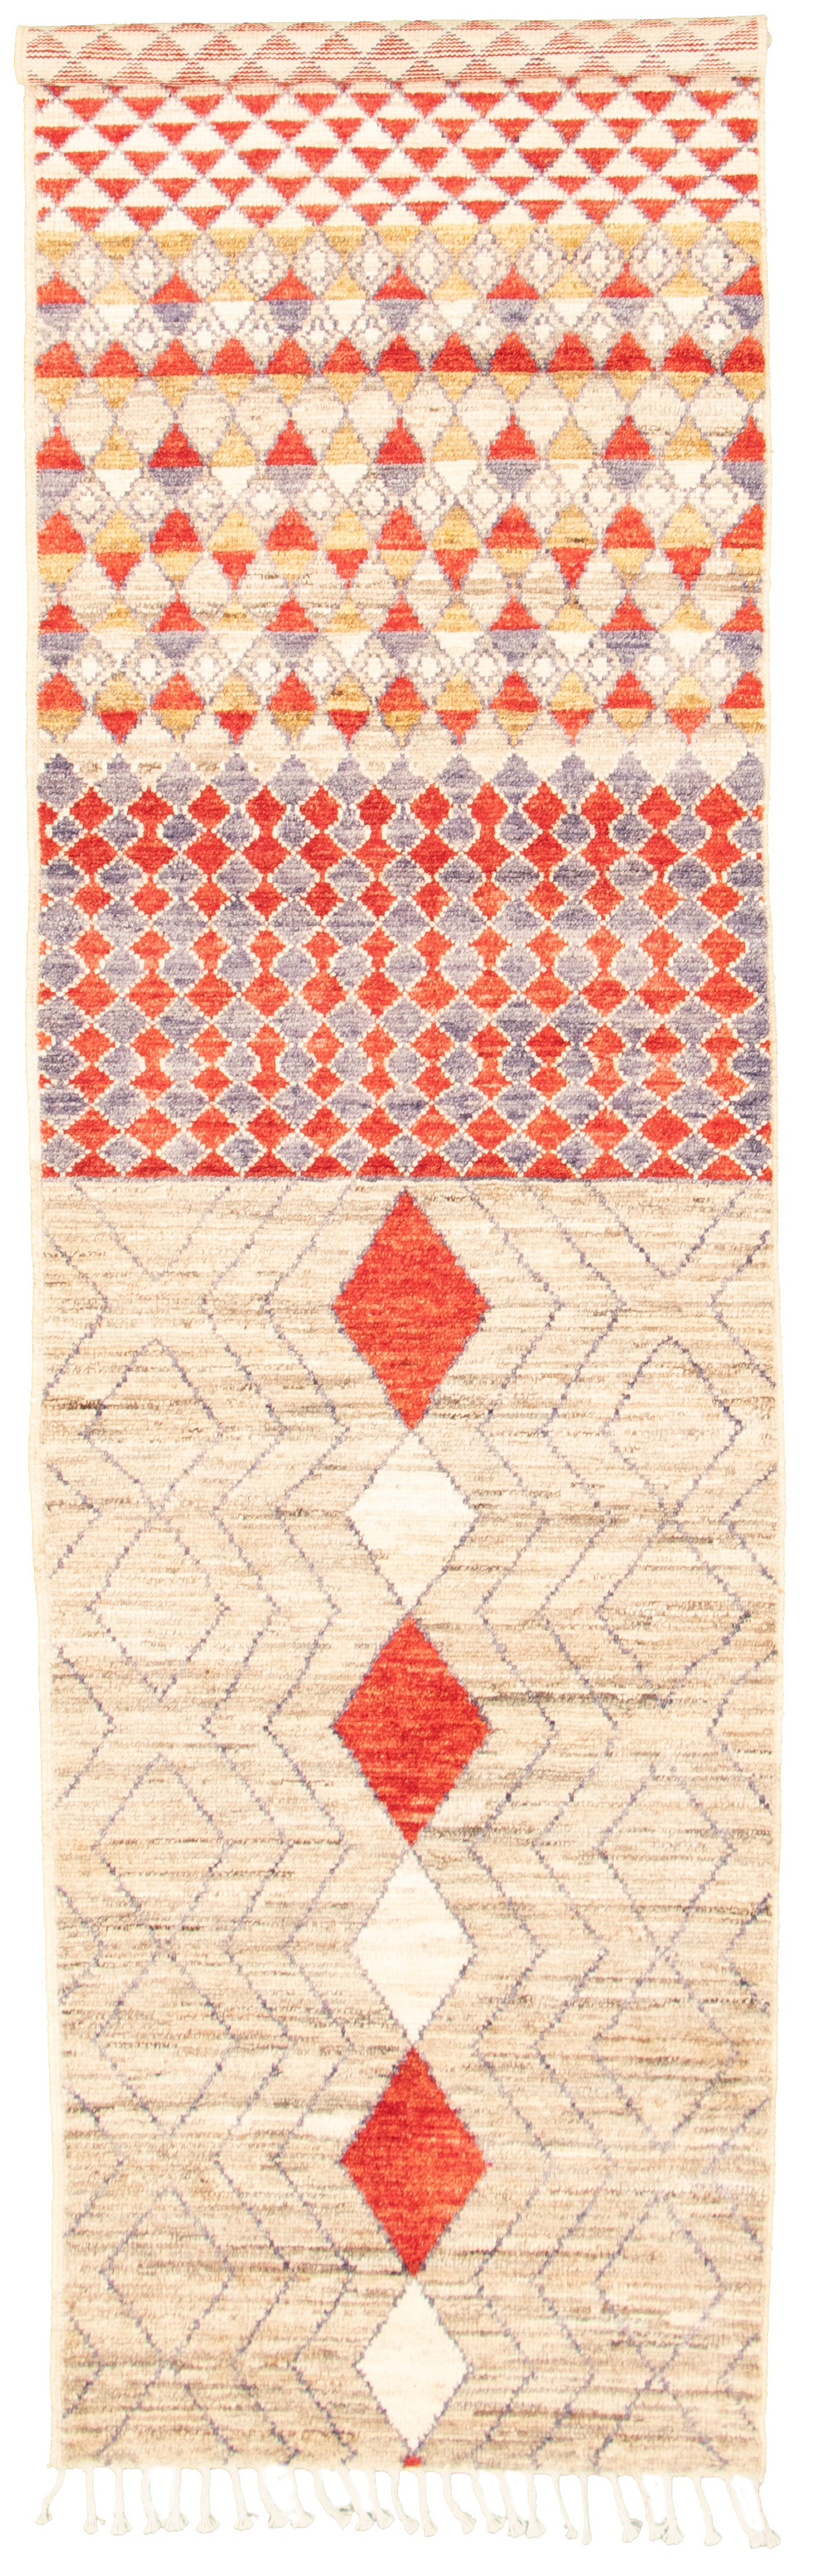 Hand-knotted Marrakech Beige Wool Rug 3'2" x 11'10" Size: 3'2" x 11'10"  